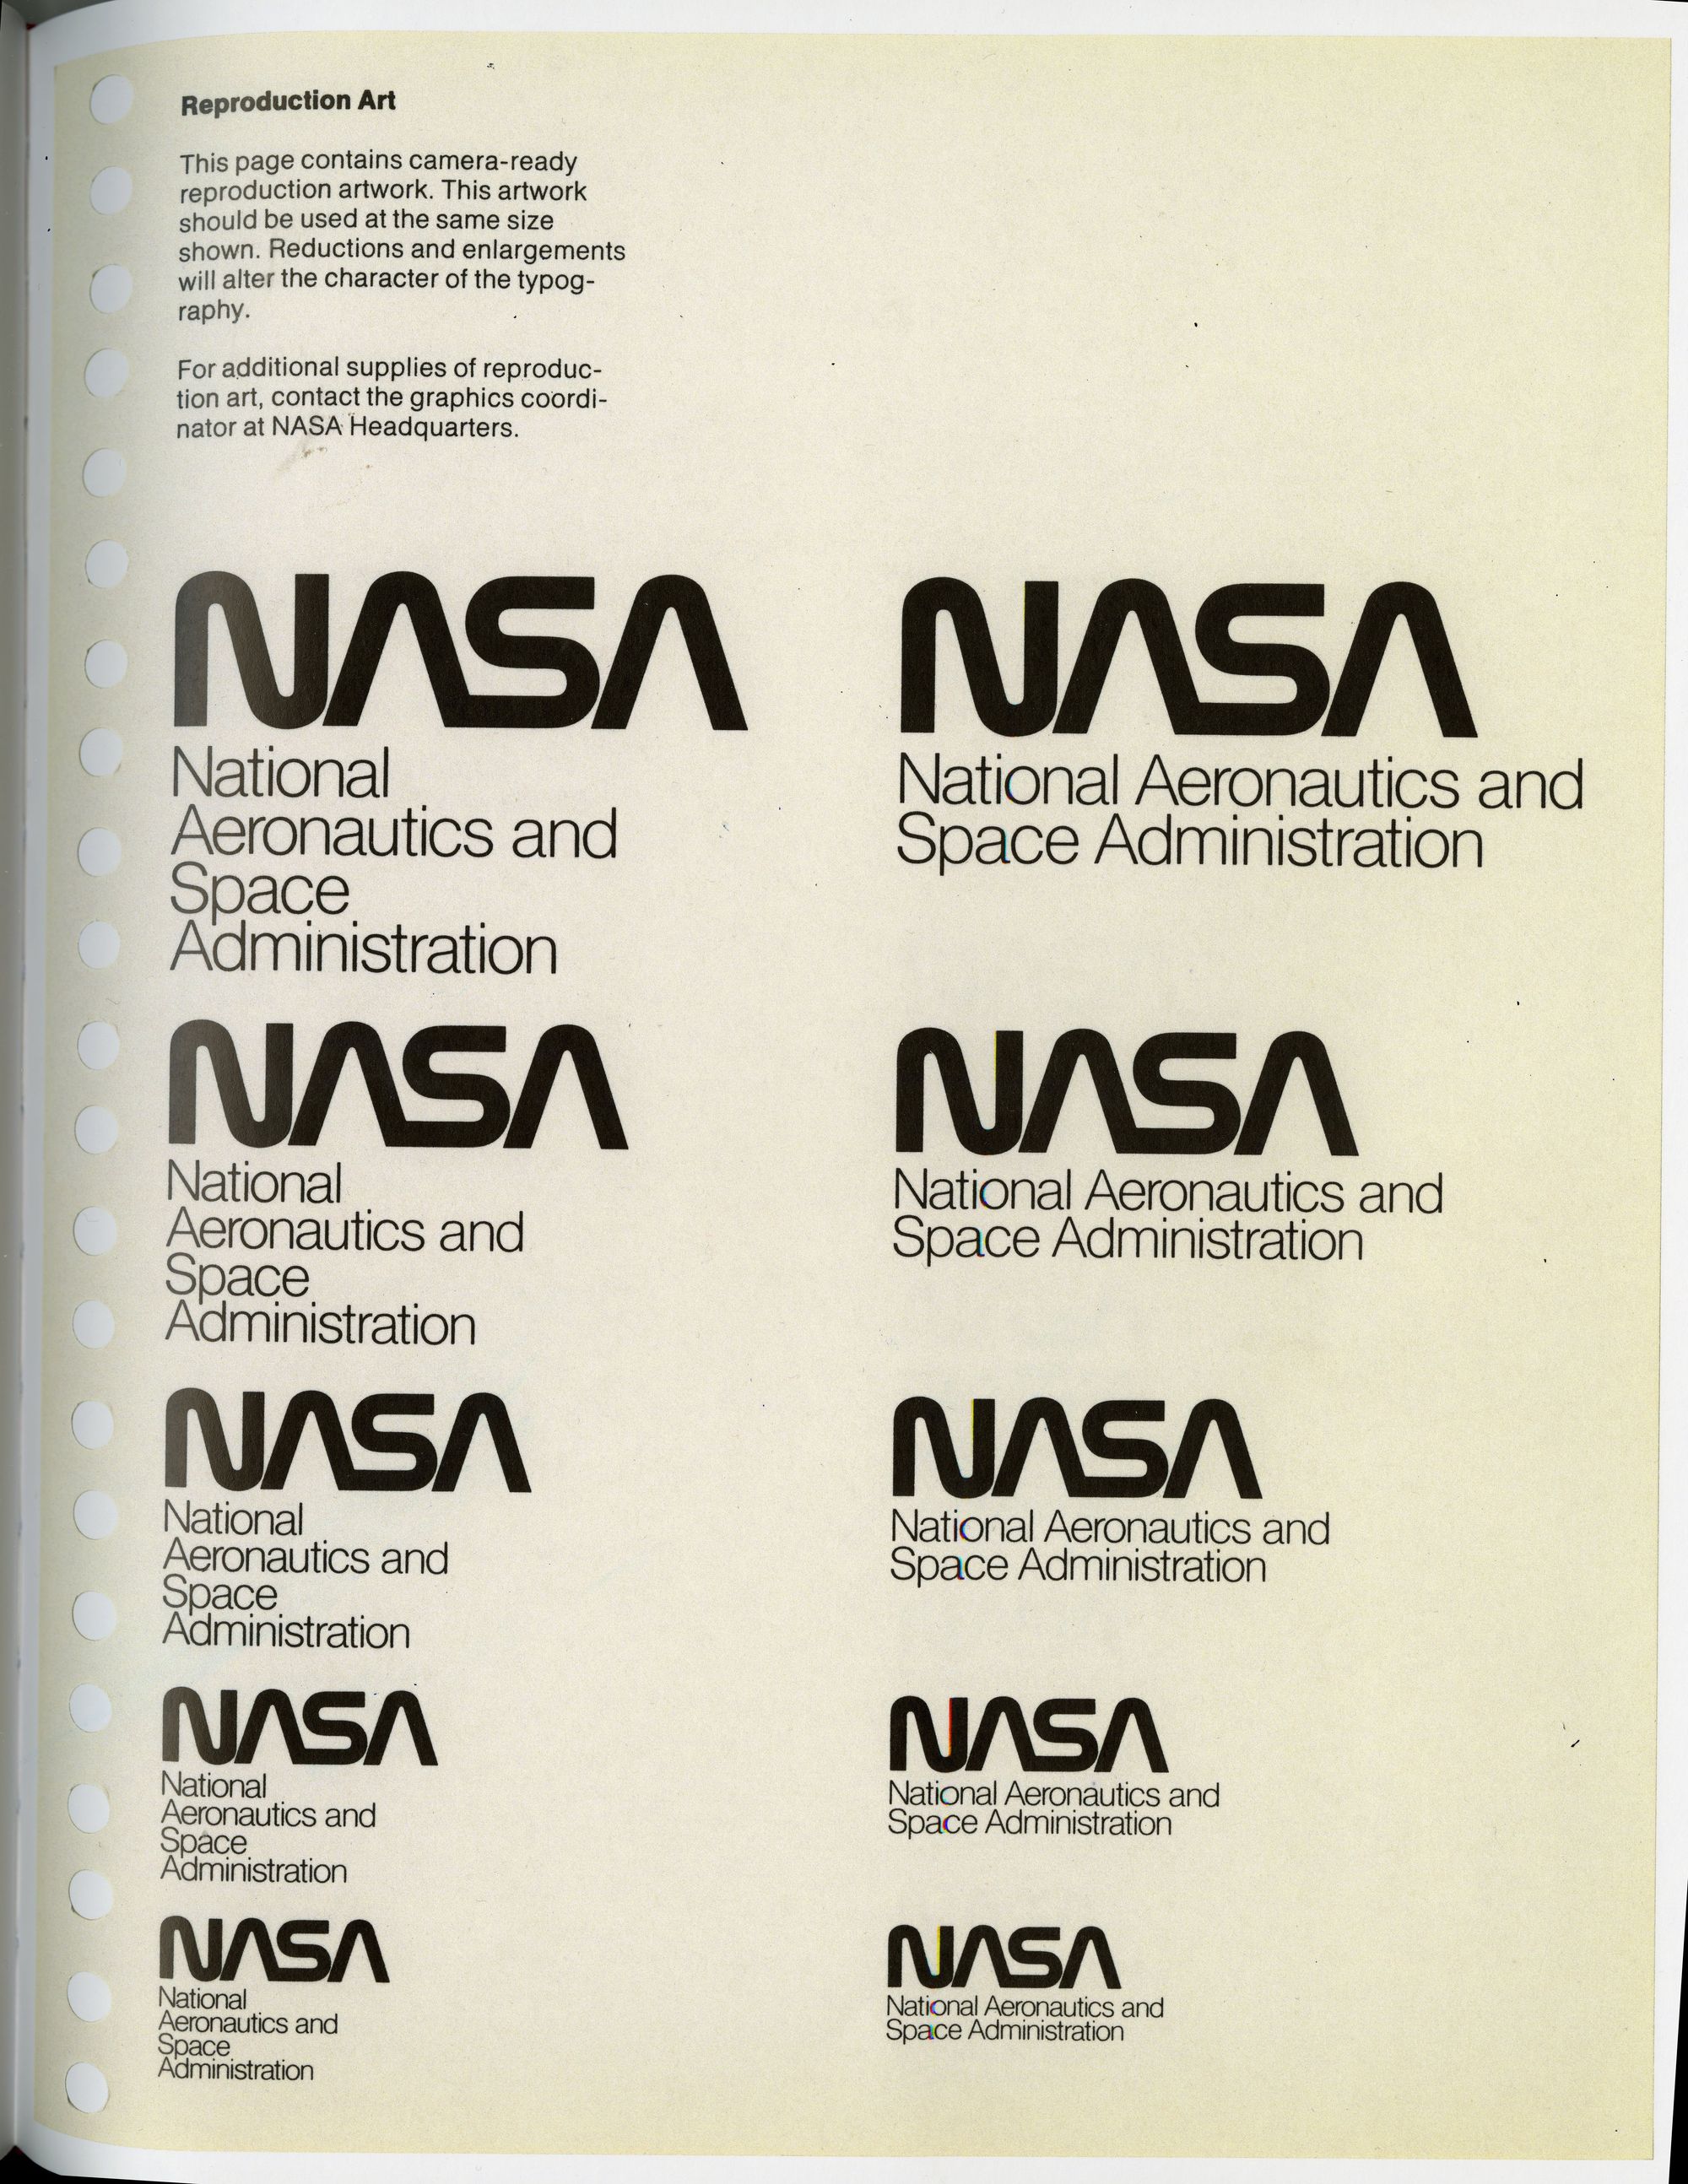 A sheet of paper with 'NASA' in a retro font, in many sizes